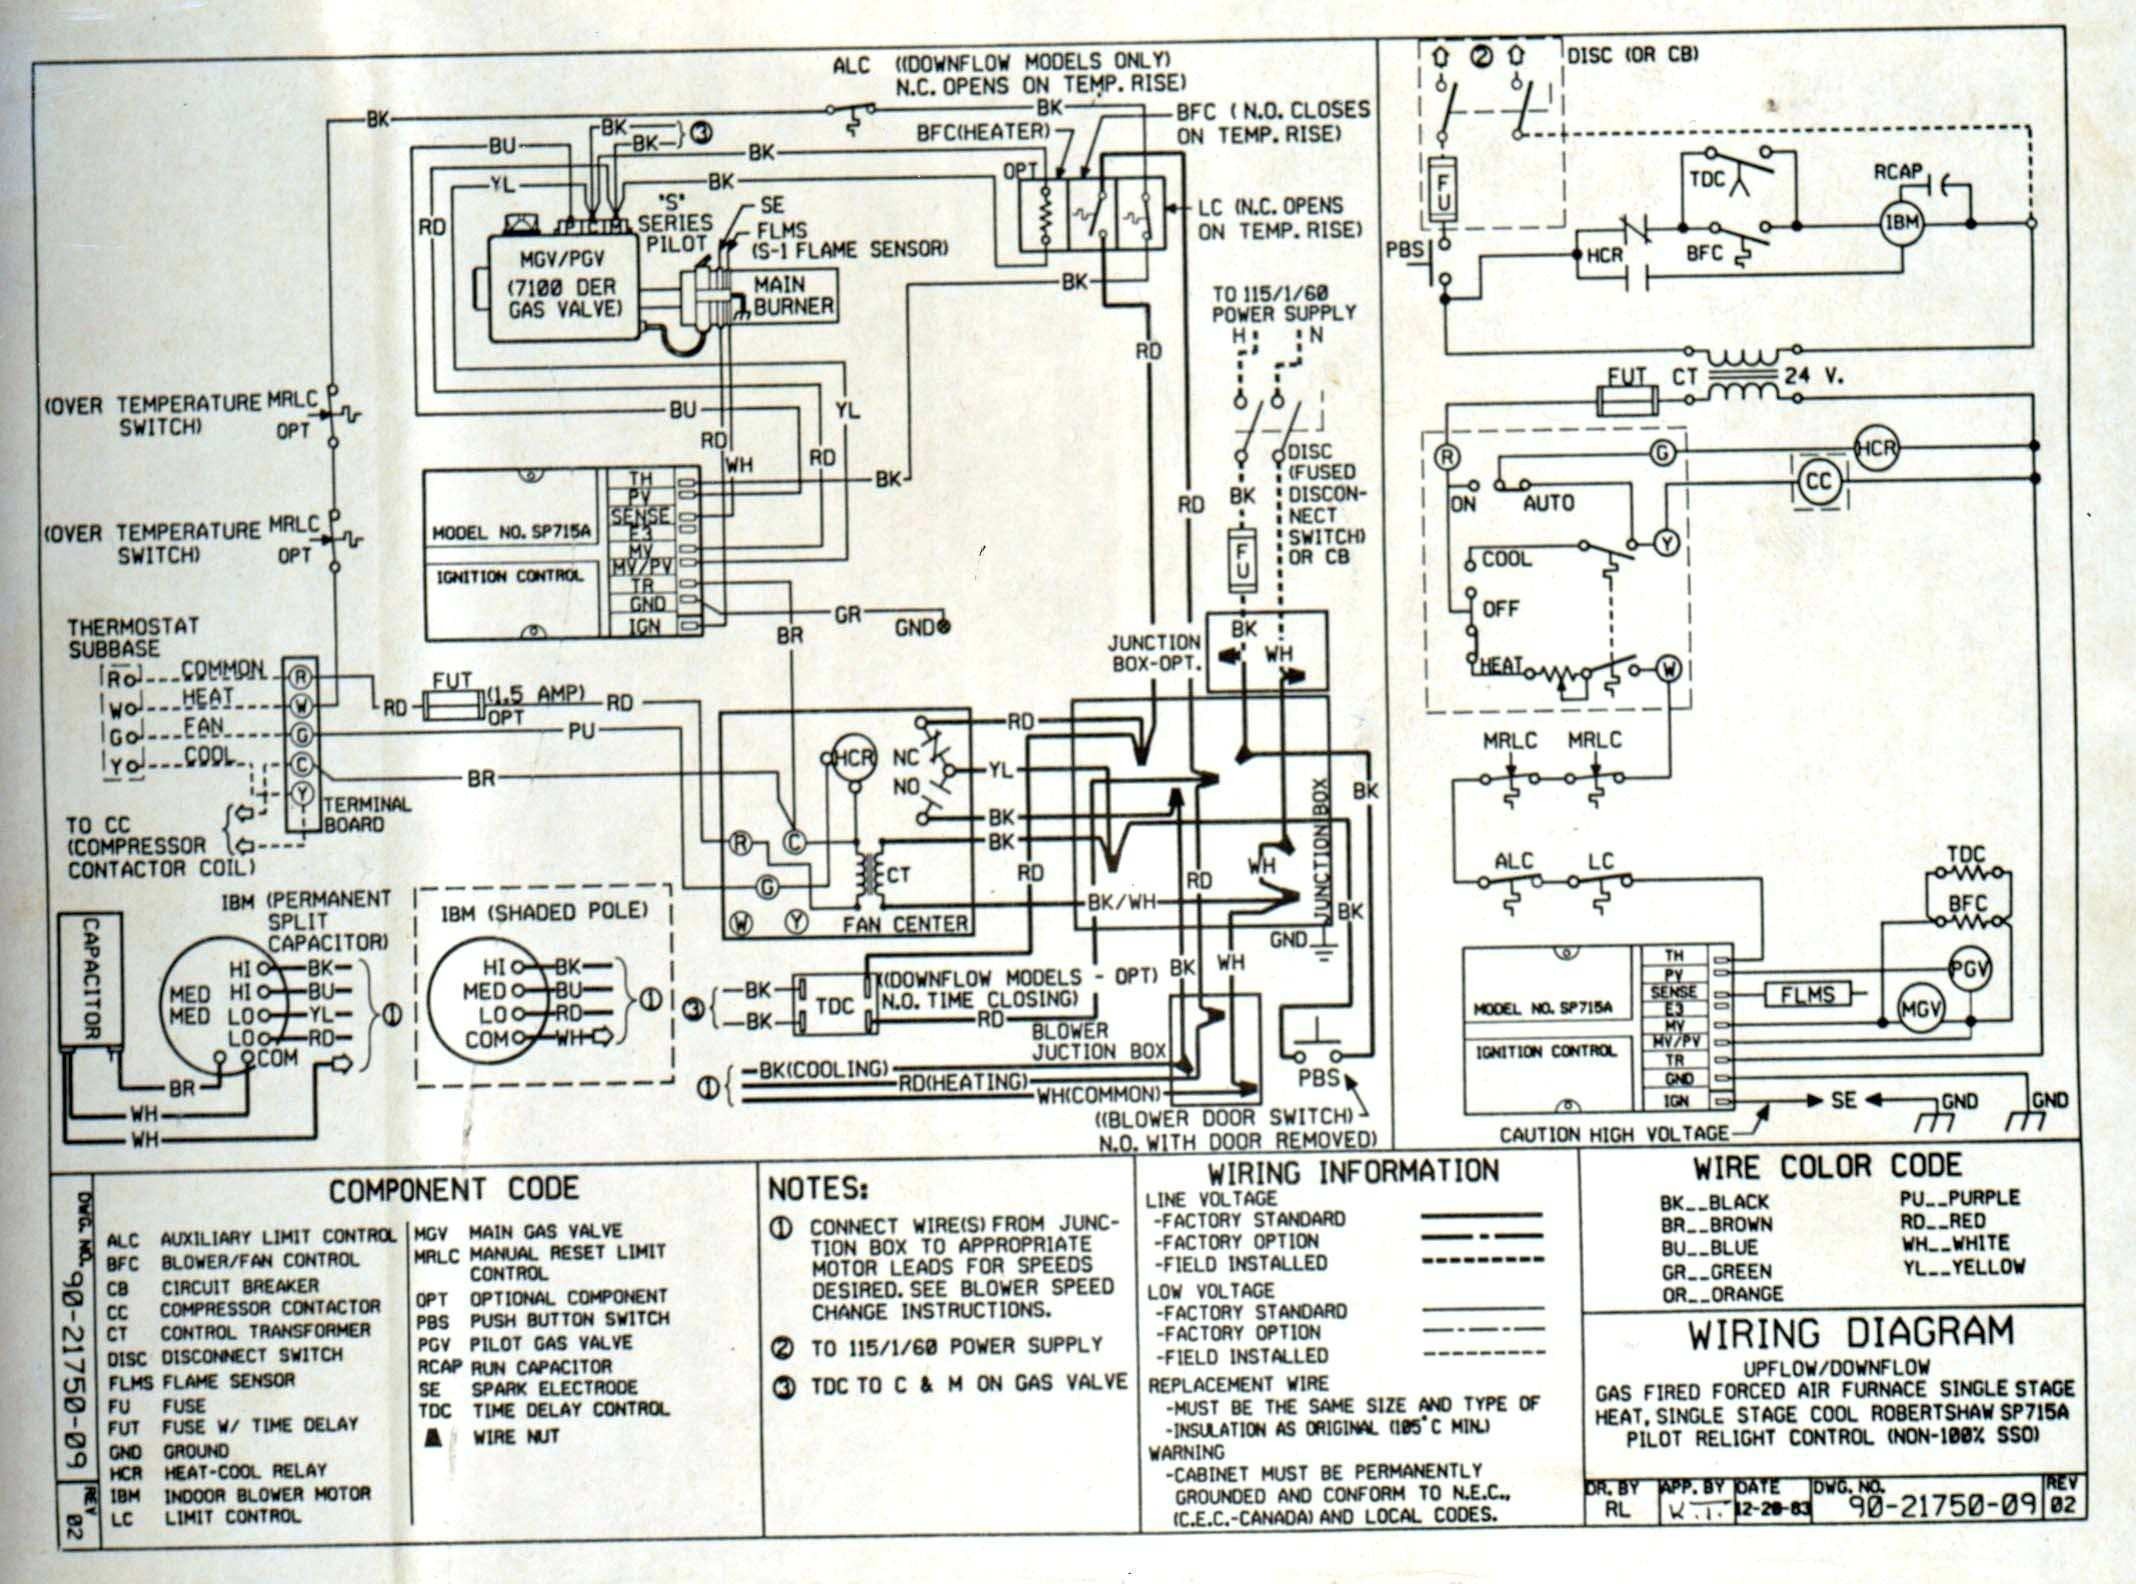 Wiring Diagram A Mobile Home New Wiring Diagram for A Mobile Home New Mobile Home